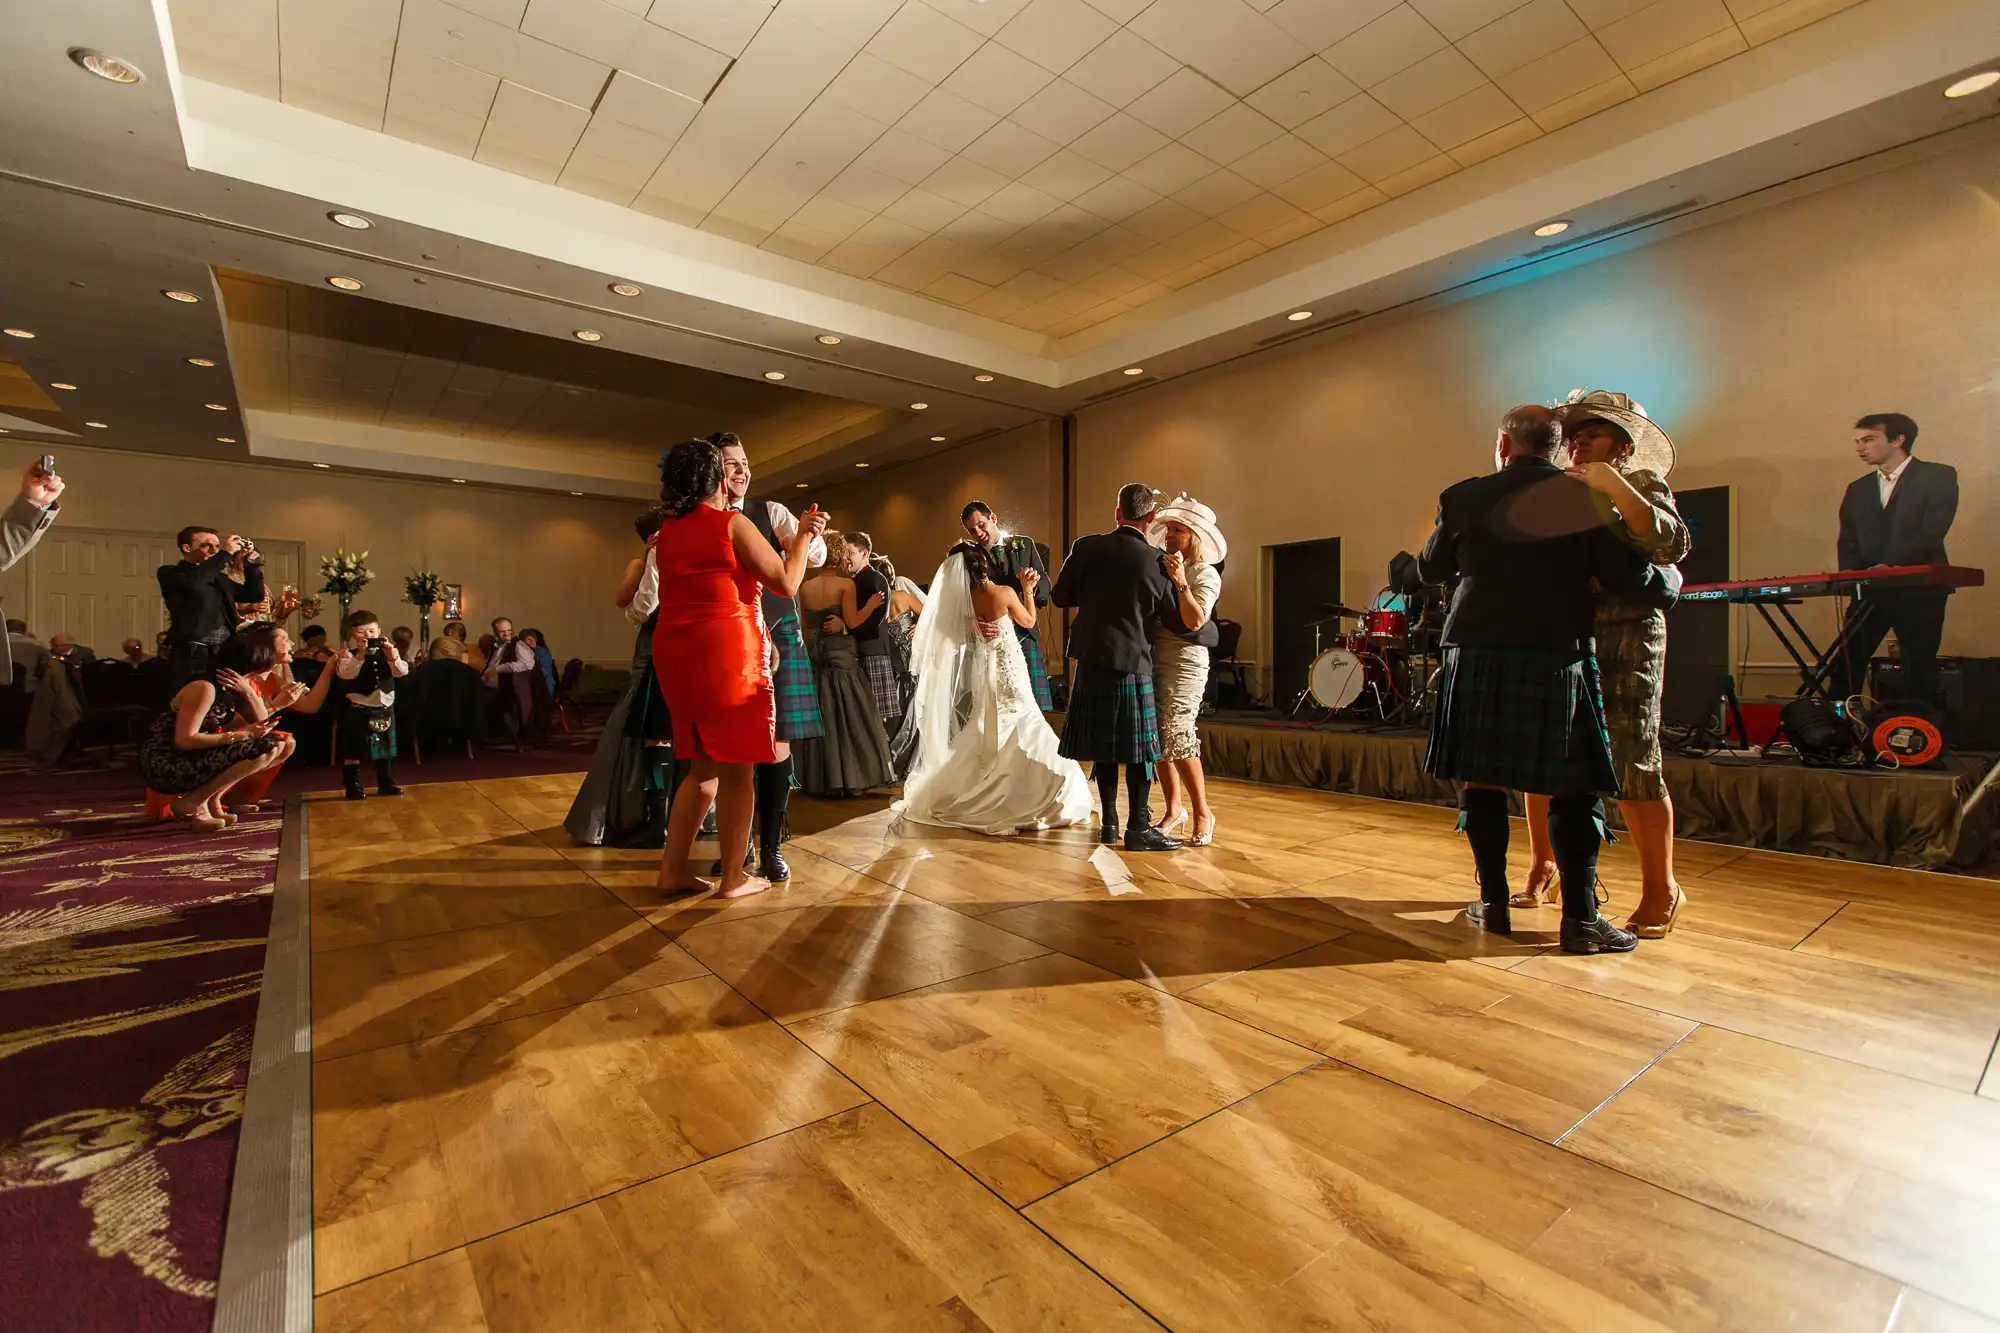 Wedding guests dance on a wooden floor in a banquet hall, with a bride in white and several guests wearing kilts, as onlookers watch from the sidelines.